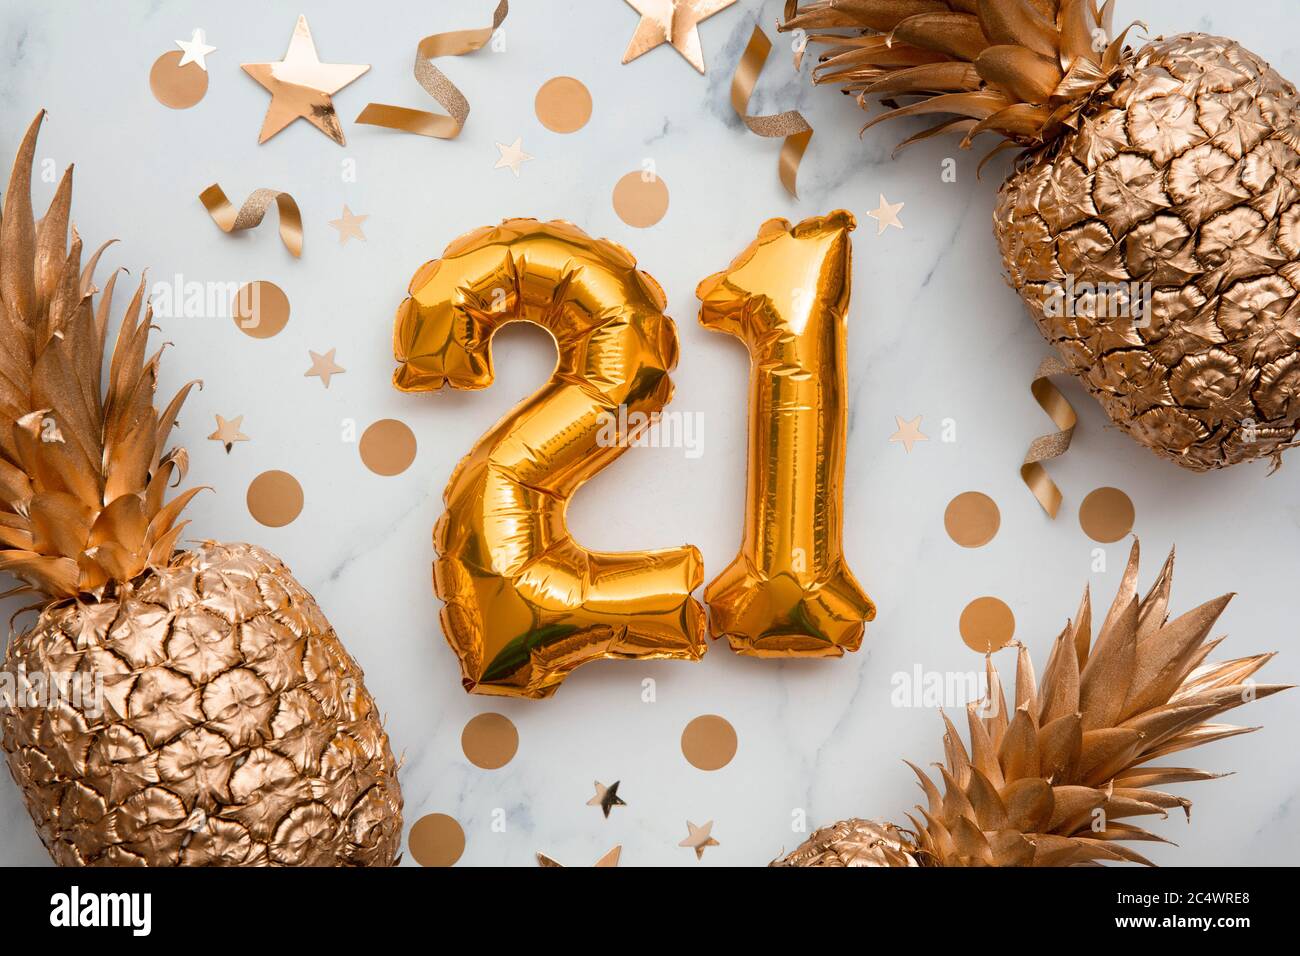 21st birthday celebration card with gold foil balloons and golden pineapples Stock Photo